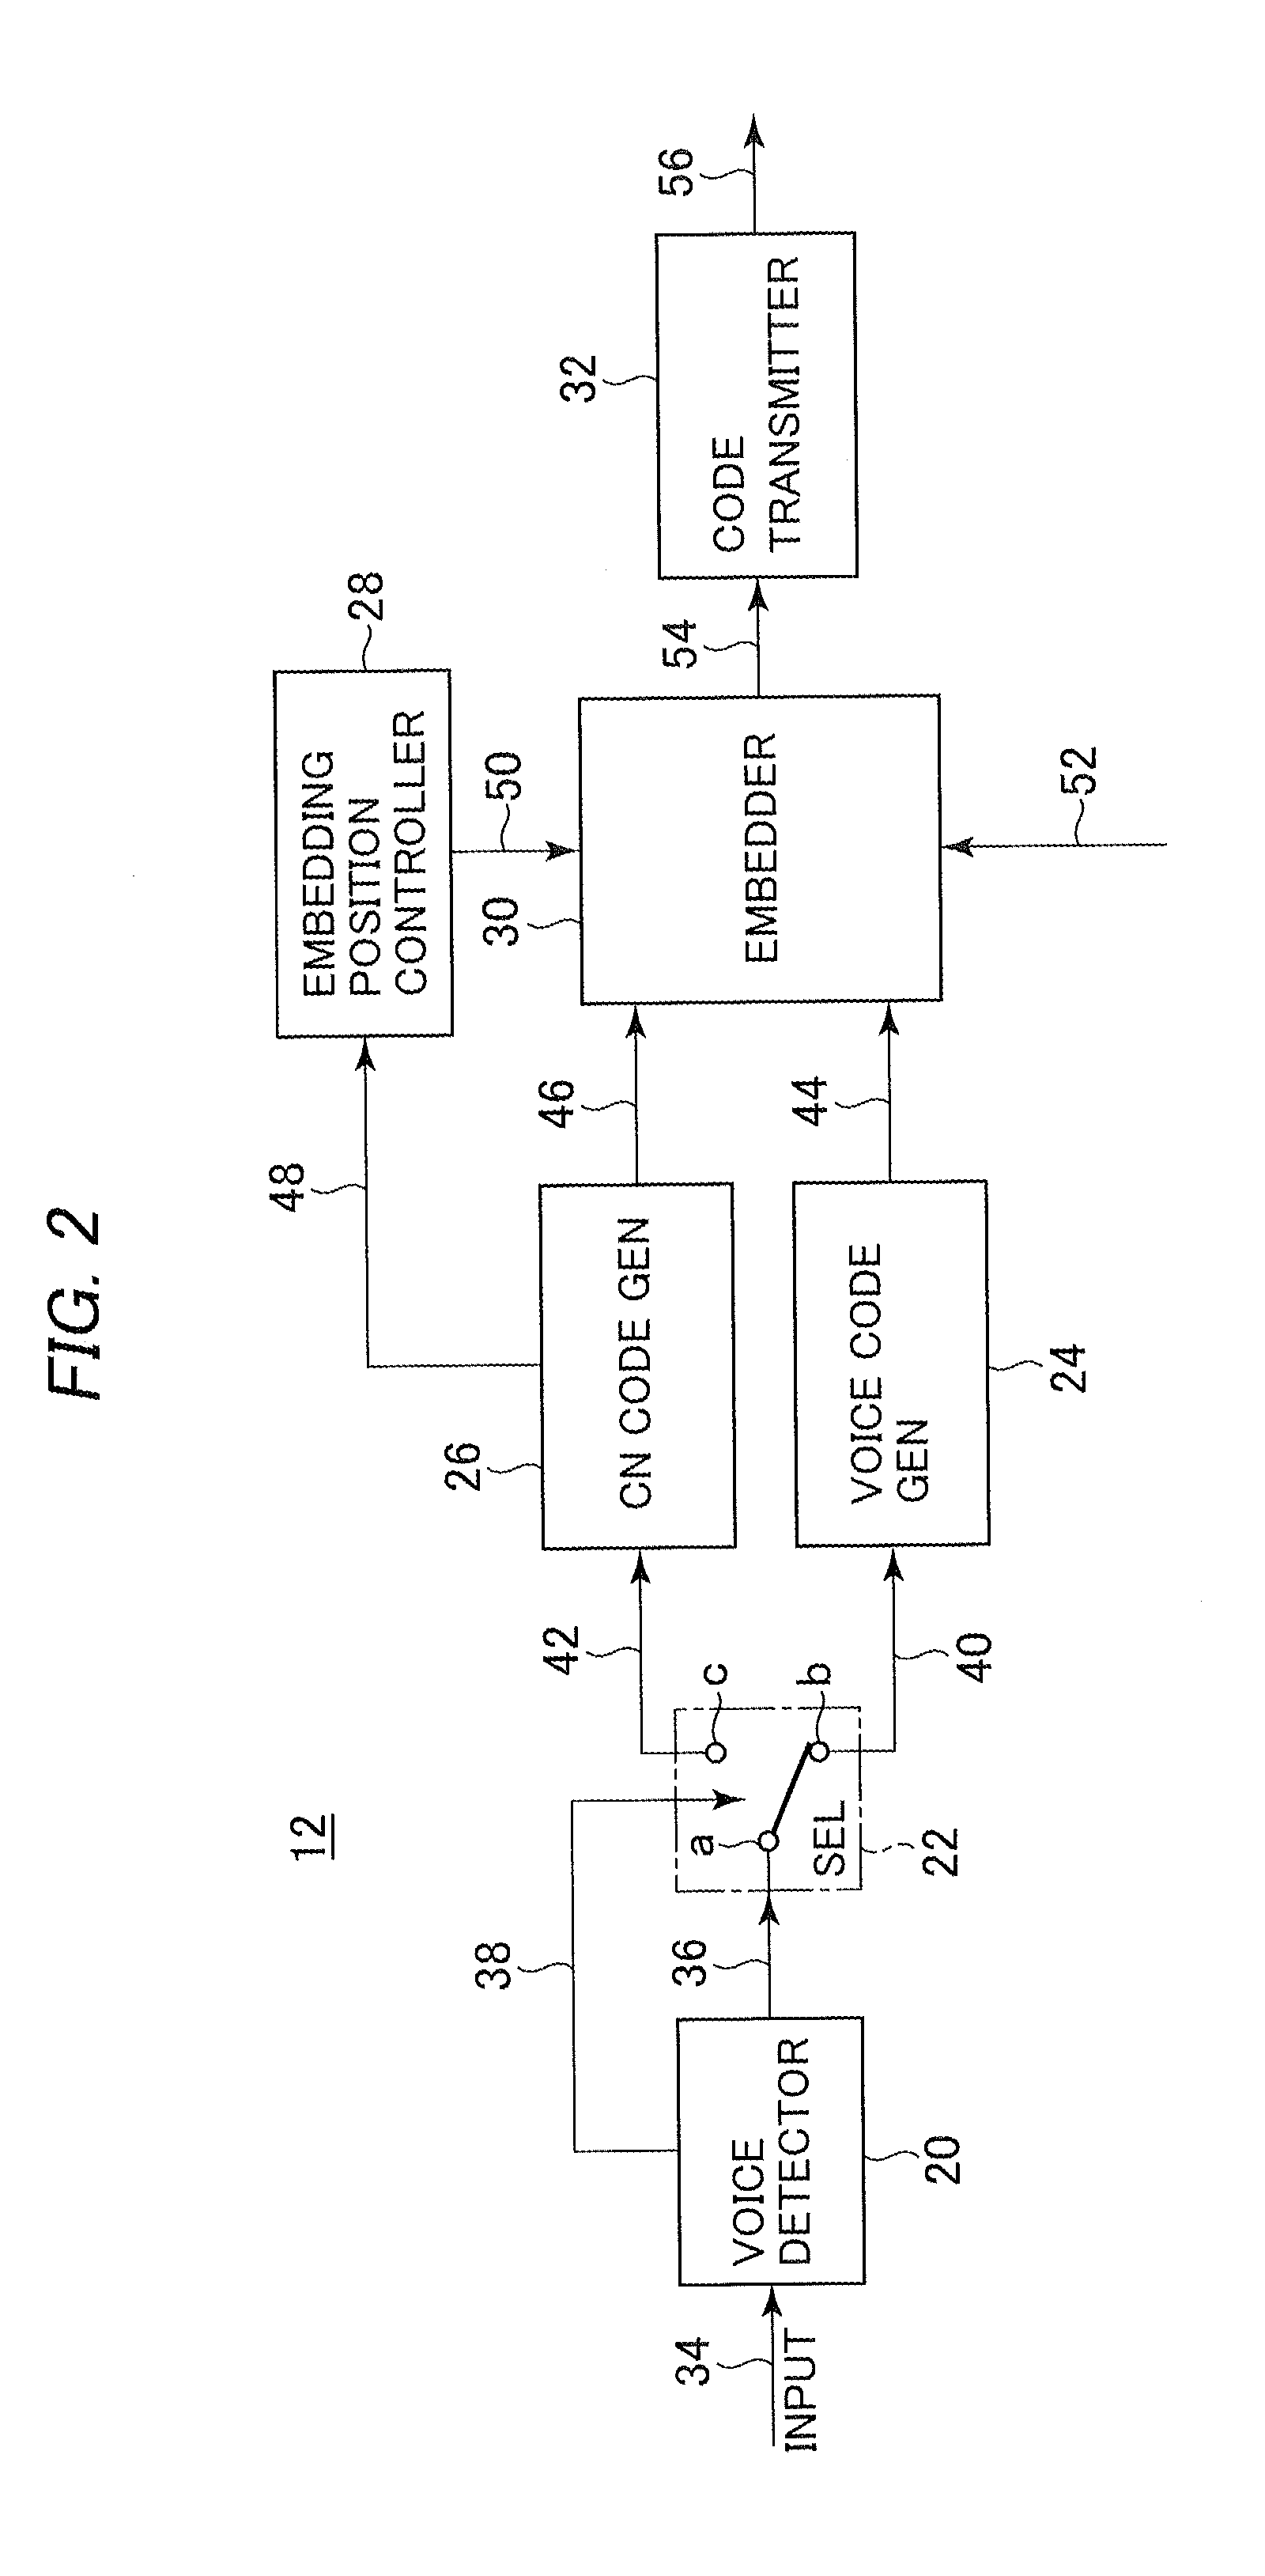 Voice communication system encoding and decoding voice and non-voice information